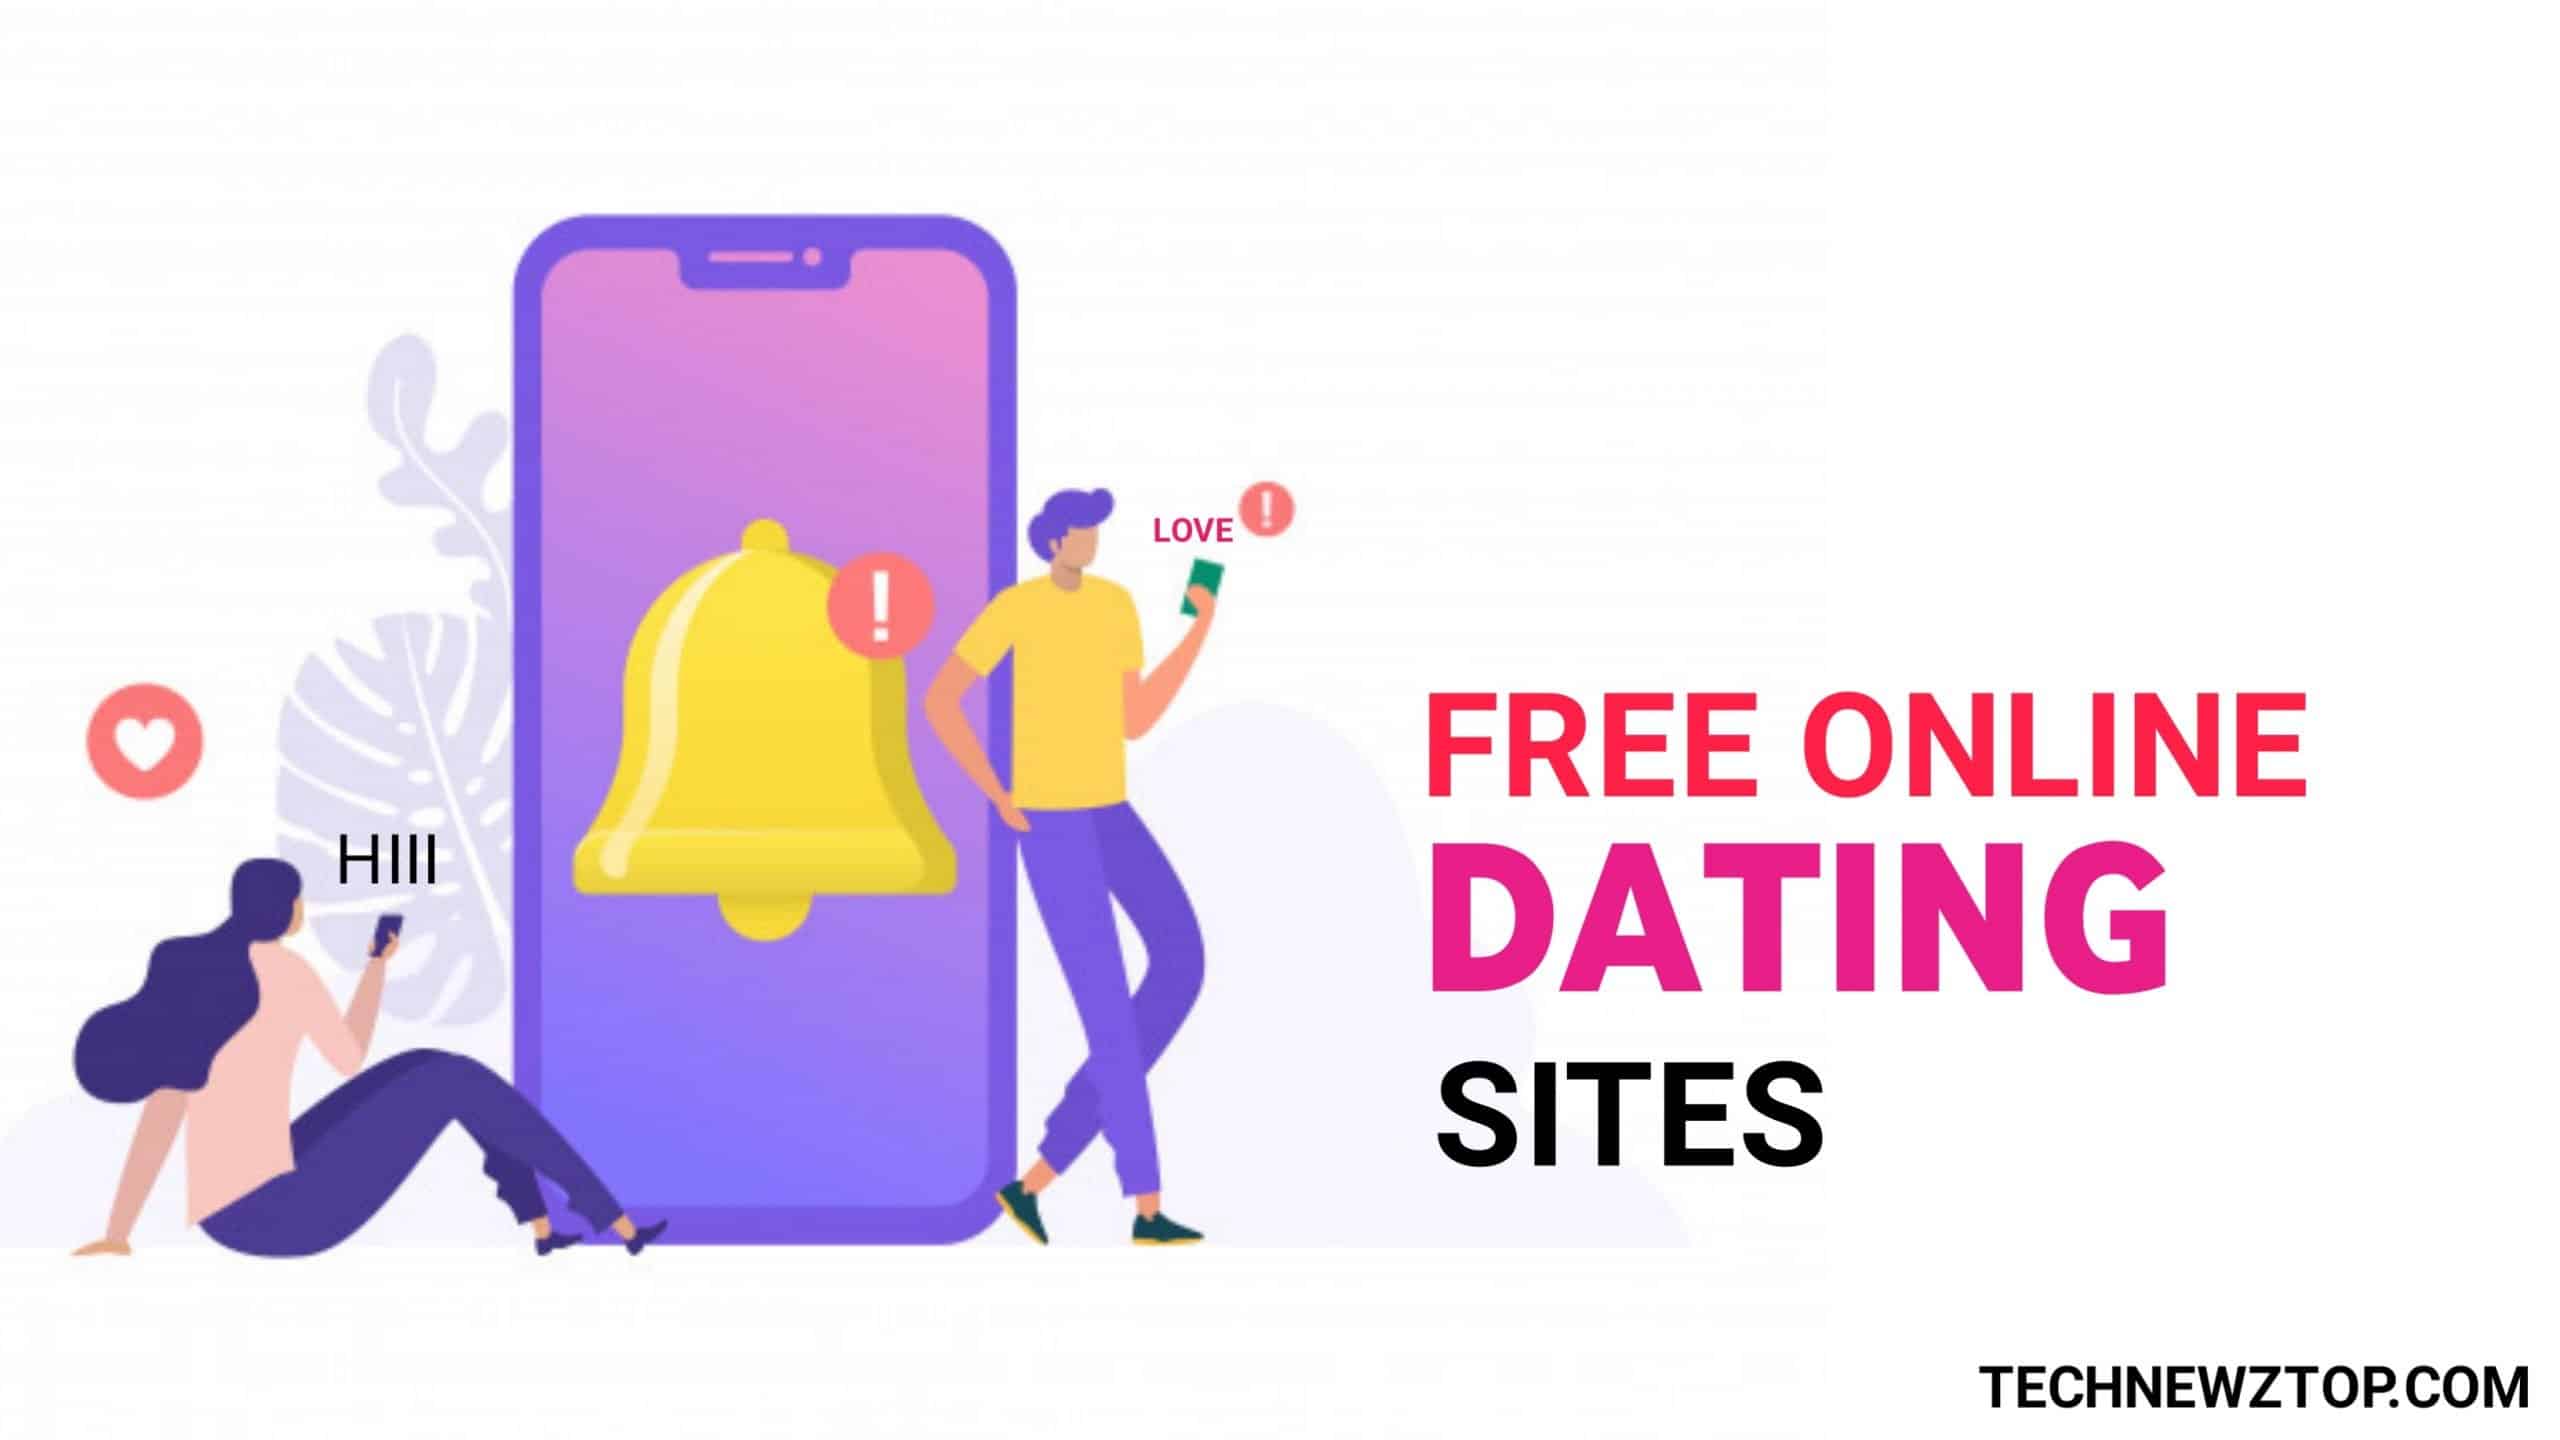 Free Online Dating Sites Make New Friends For Free.